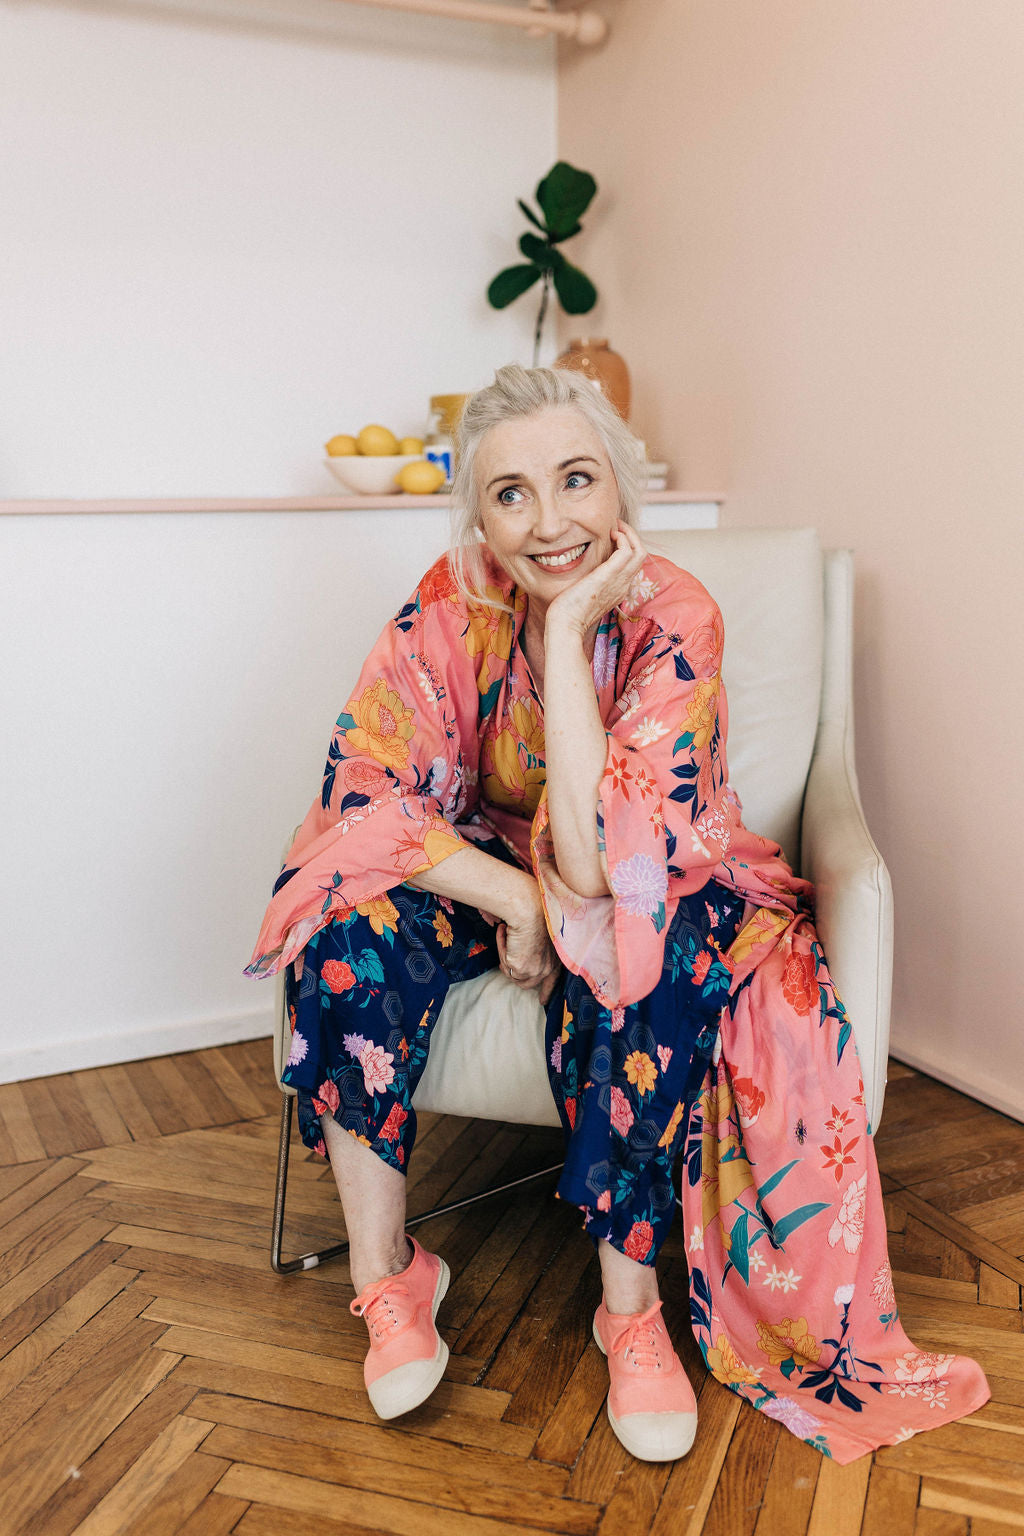 woman sitting in a chair smiling wearing bright colourful pants, top and pink floral chimono robe